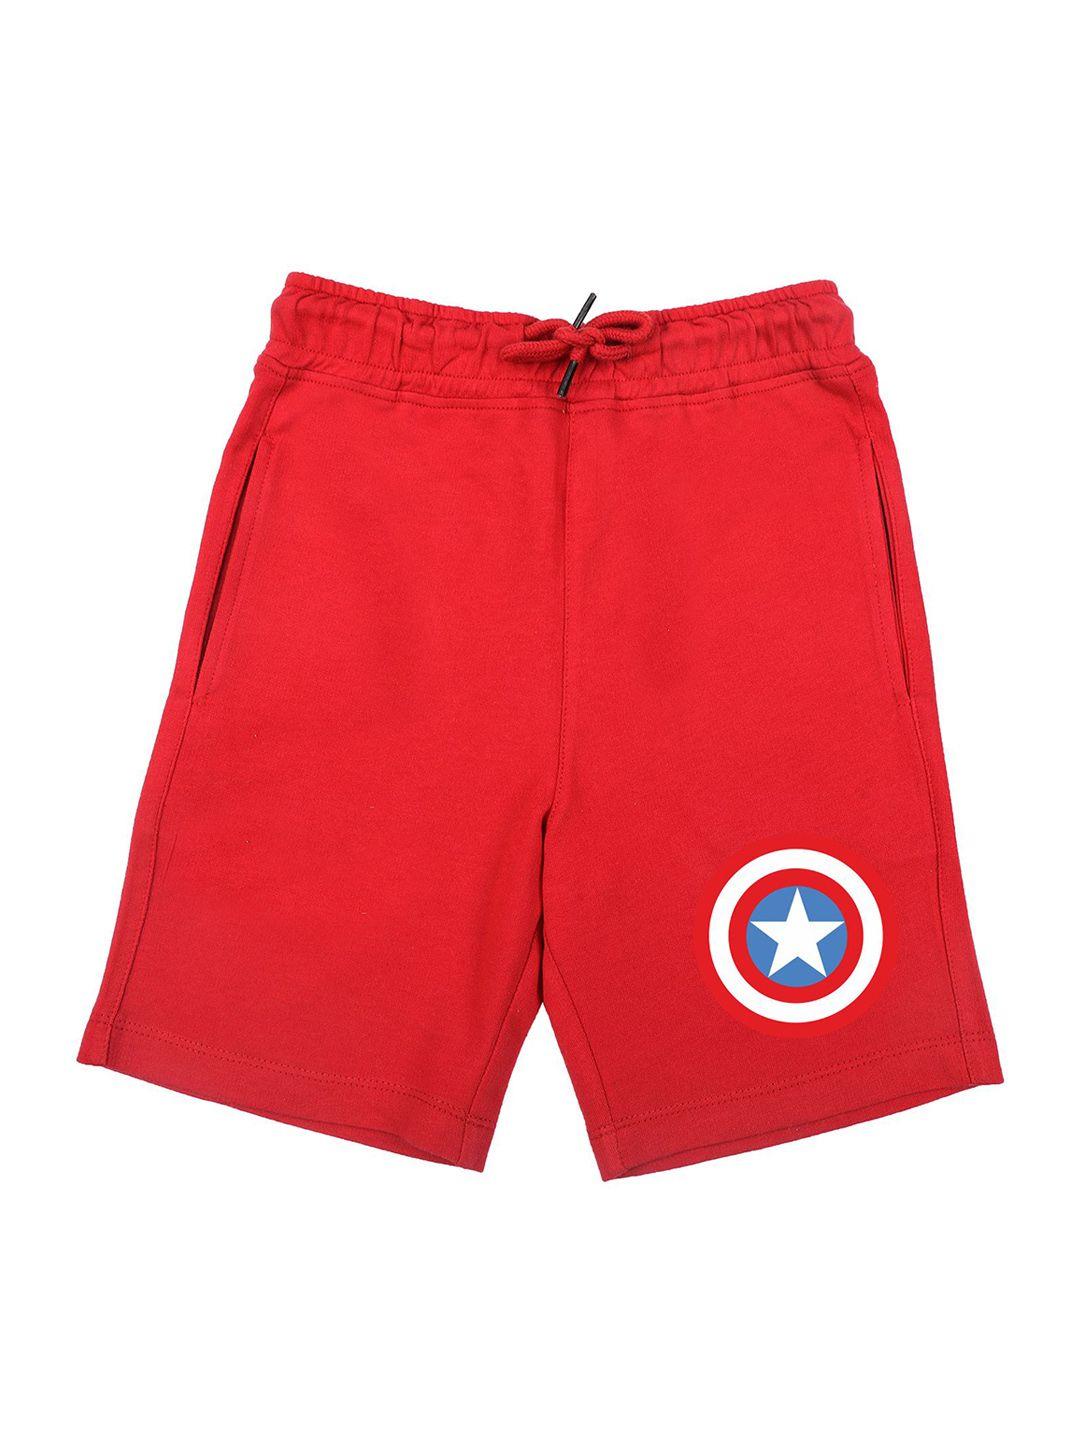 Marvel by Wear Your Mind Boys Red Graphic Print Shorts